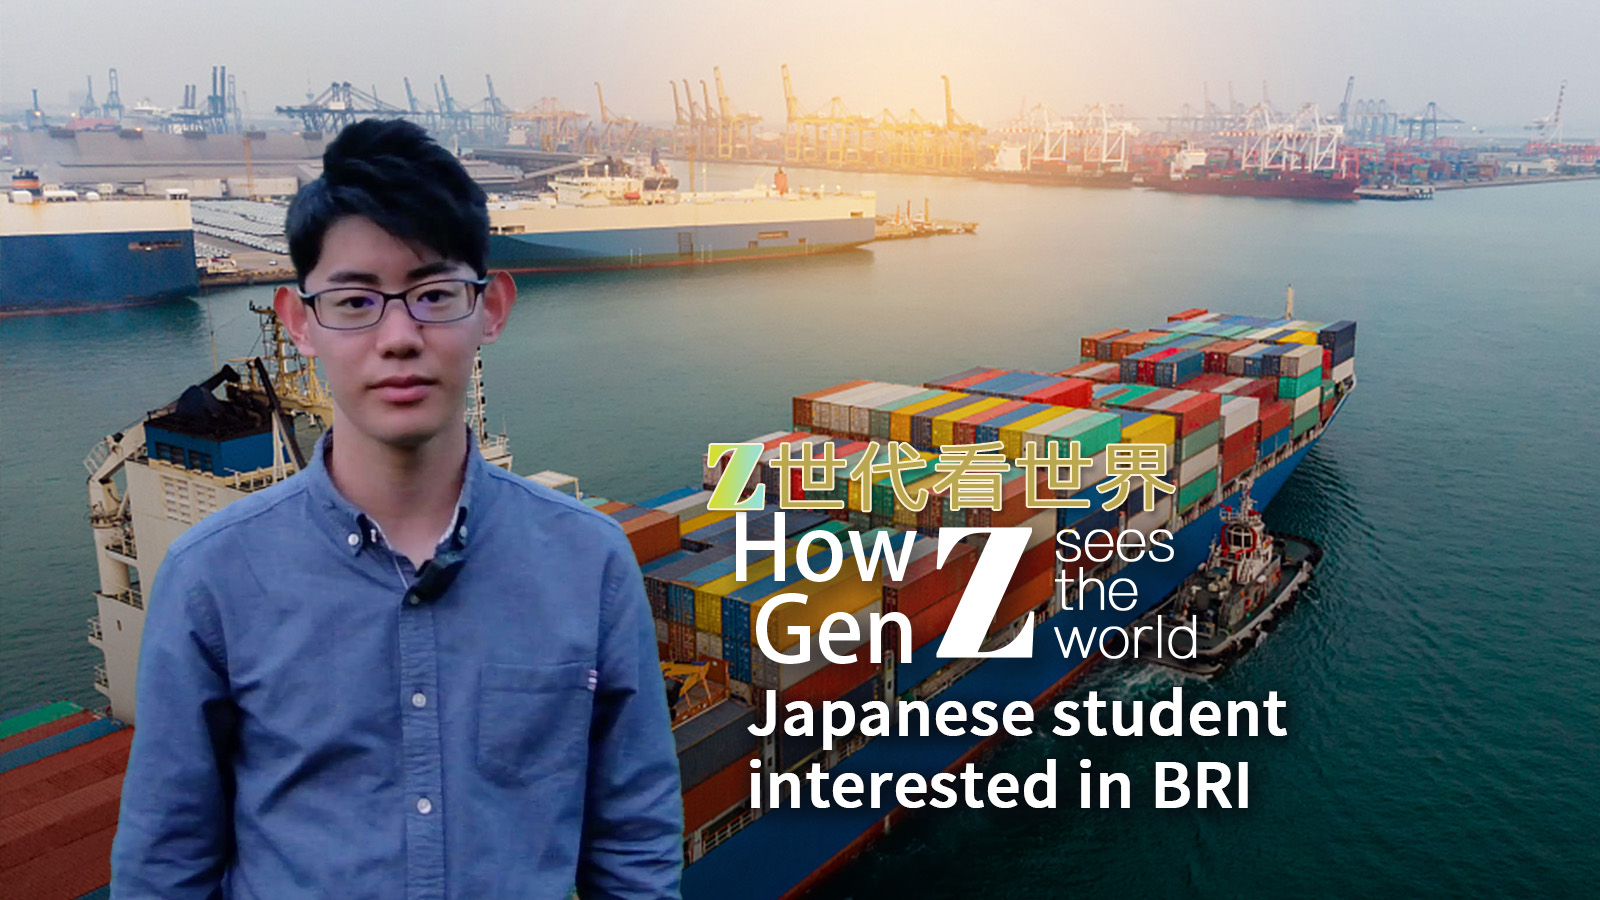 How Gen Z sees the world: Japanese student interested in BRI